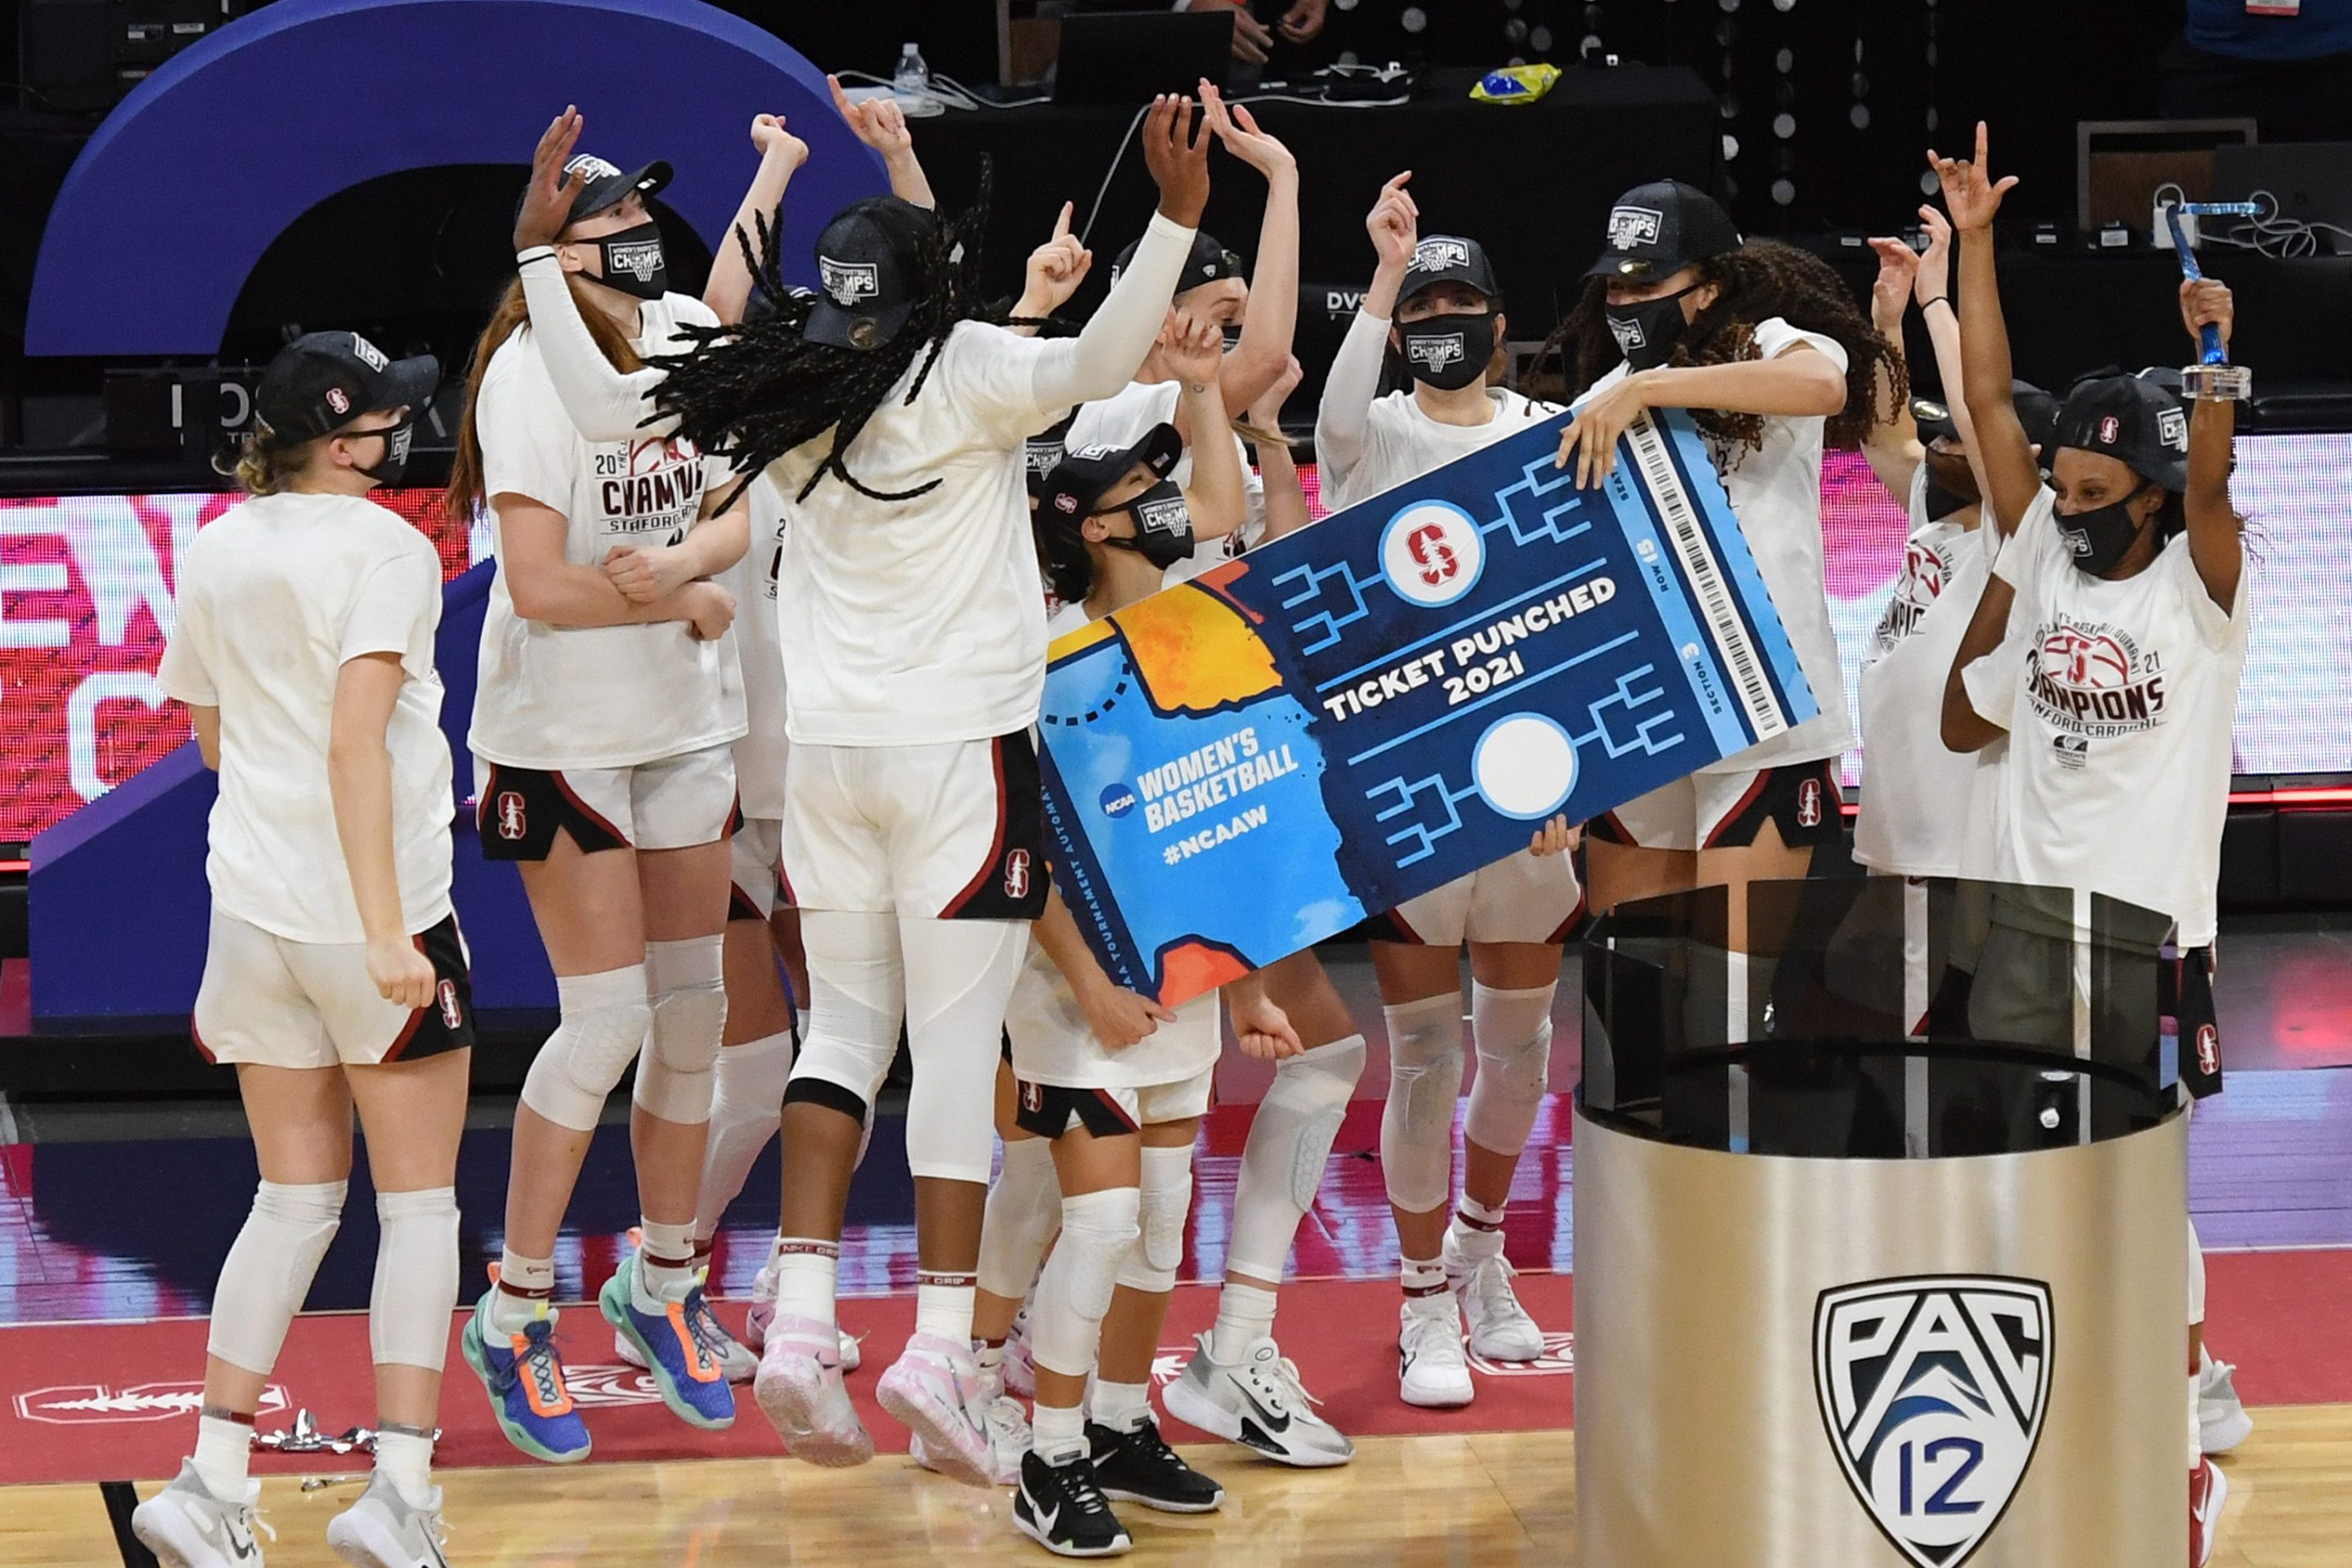 The Stanford Cardinal celebrate on the court after their 75-55 victory over the UCLA Bruins to win the championship game of the Pac-12 Conference women's basketball tournament at Michelob ULTRA Arena on March 7, 2021 in Las Vegas, Nevada.